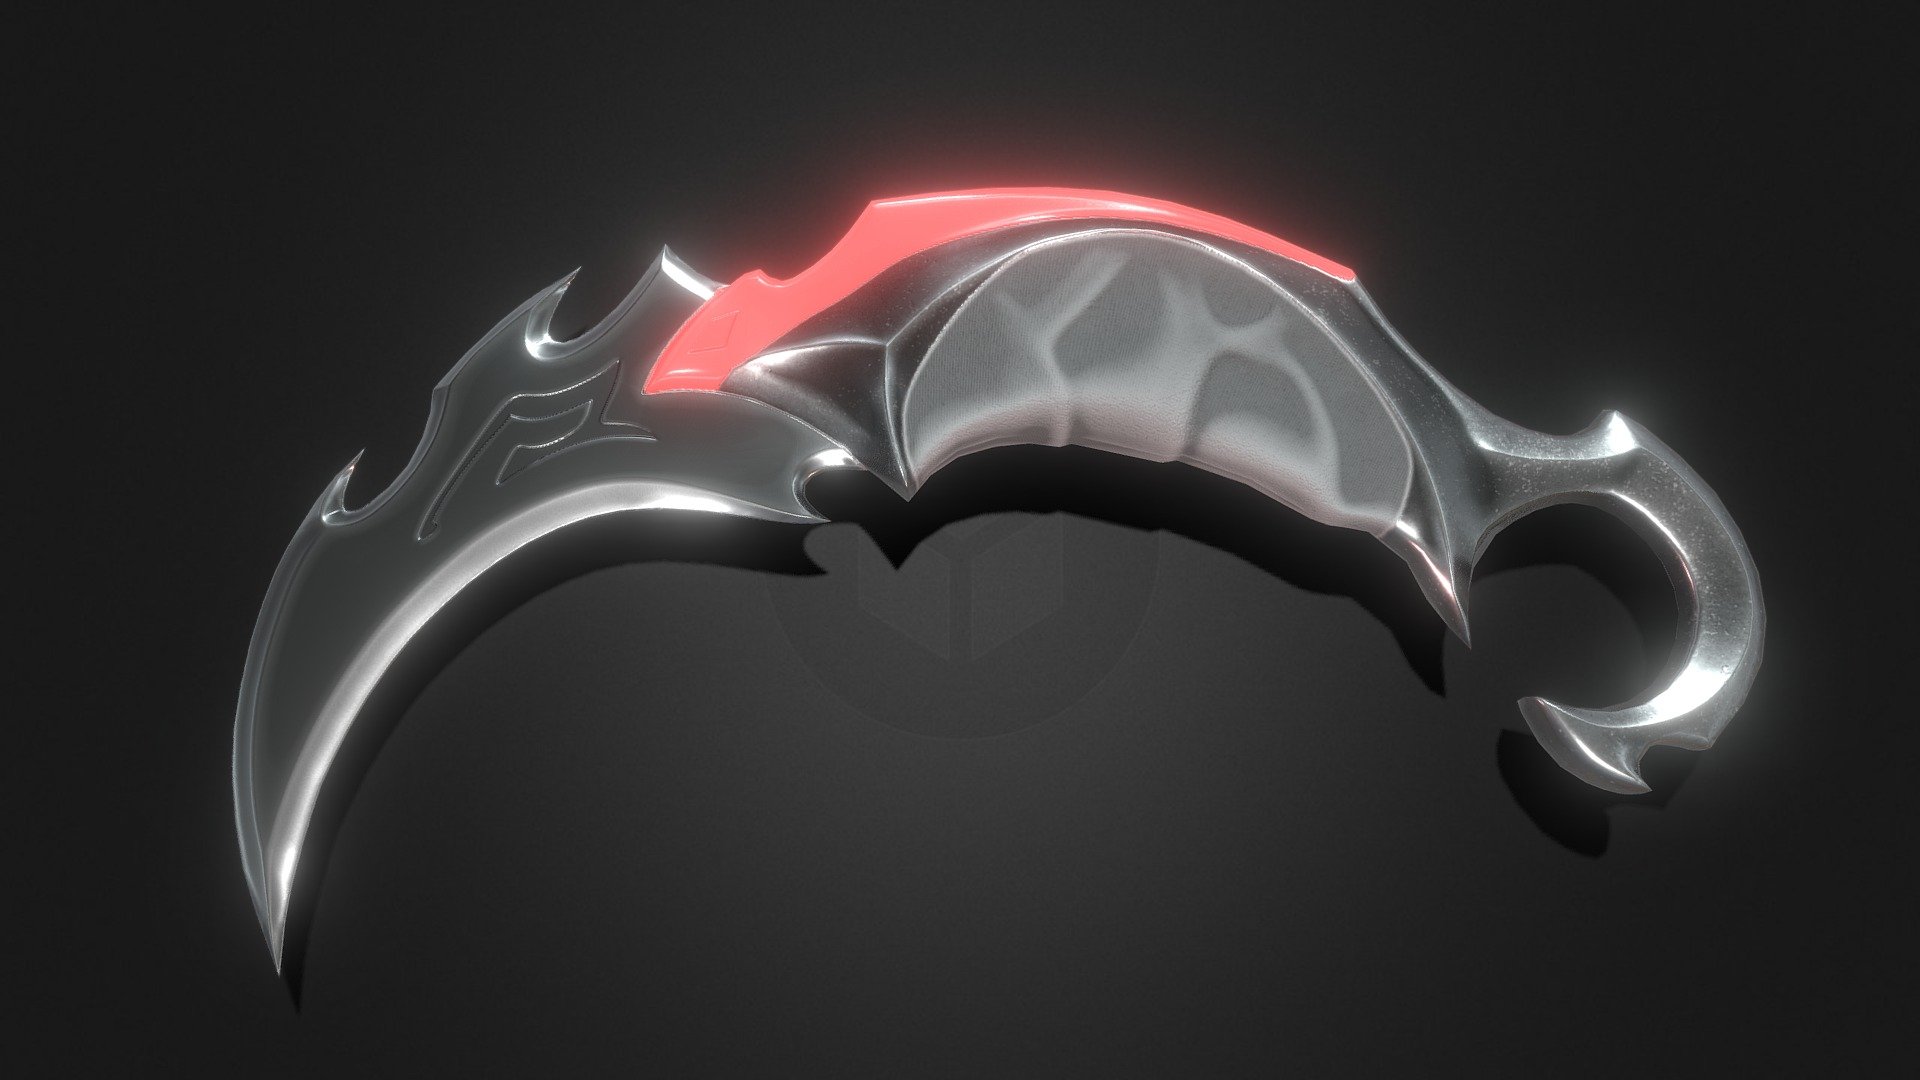 This is the Reaver Karambit, a knife inspired by the Valorant Knife. Created using Blender 3.4.0 and Substance Painter, this knife features an elegant and futuristic design. With a high-quality stainless steel blade and a comfortable grip handle, the Reaver Karambit is the perfect choice for weapon enthusiasts and collectors. Get your hands on the Reaver Karambit now and add a unique touch to your collection.



If you want to order a 3D object game for game development I provide development services and also for other businesses, you can go here, at a friendly price

find me on:




https://www.fiverr.com/aprilias

email: apriliasputra@gmail.com



I've also made some assets for free, you can check out my full profile to get them, but I'd really appreciate it if you could support me on:




Original work: Rzyas - Reaver Karambit - Buy Royalty Free 3D model by Rzyas 3d model